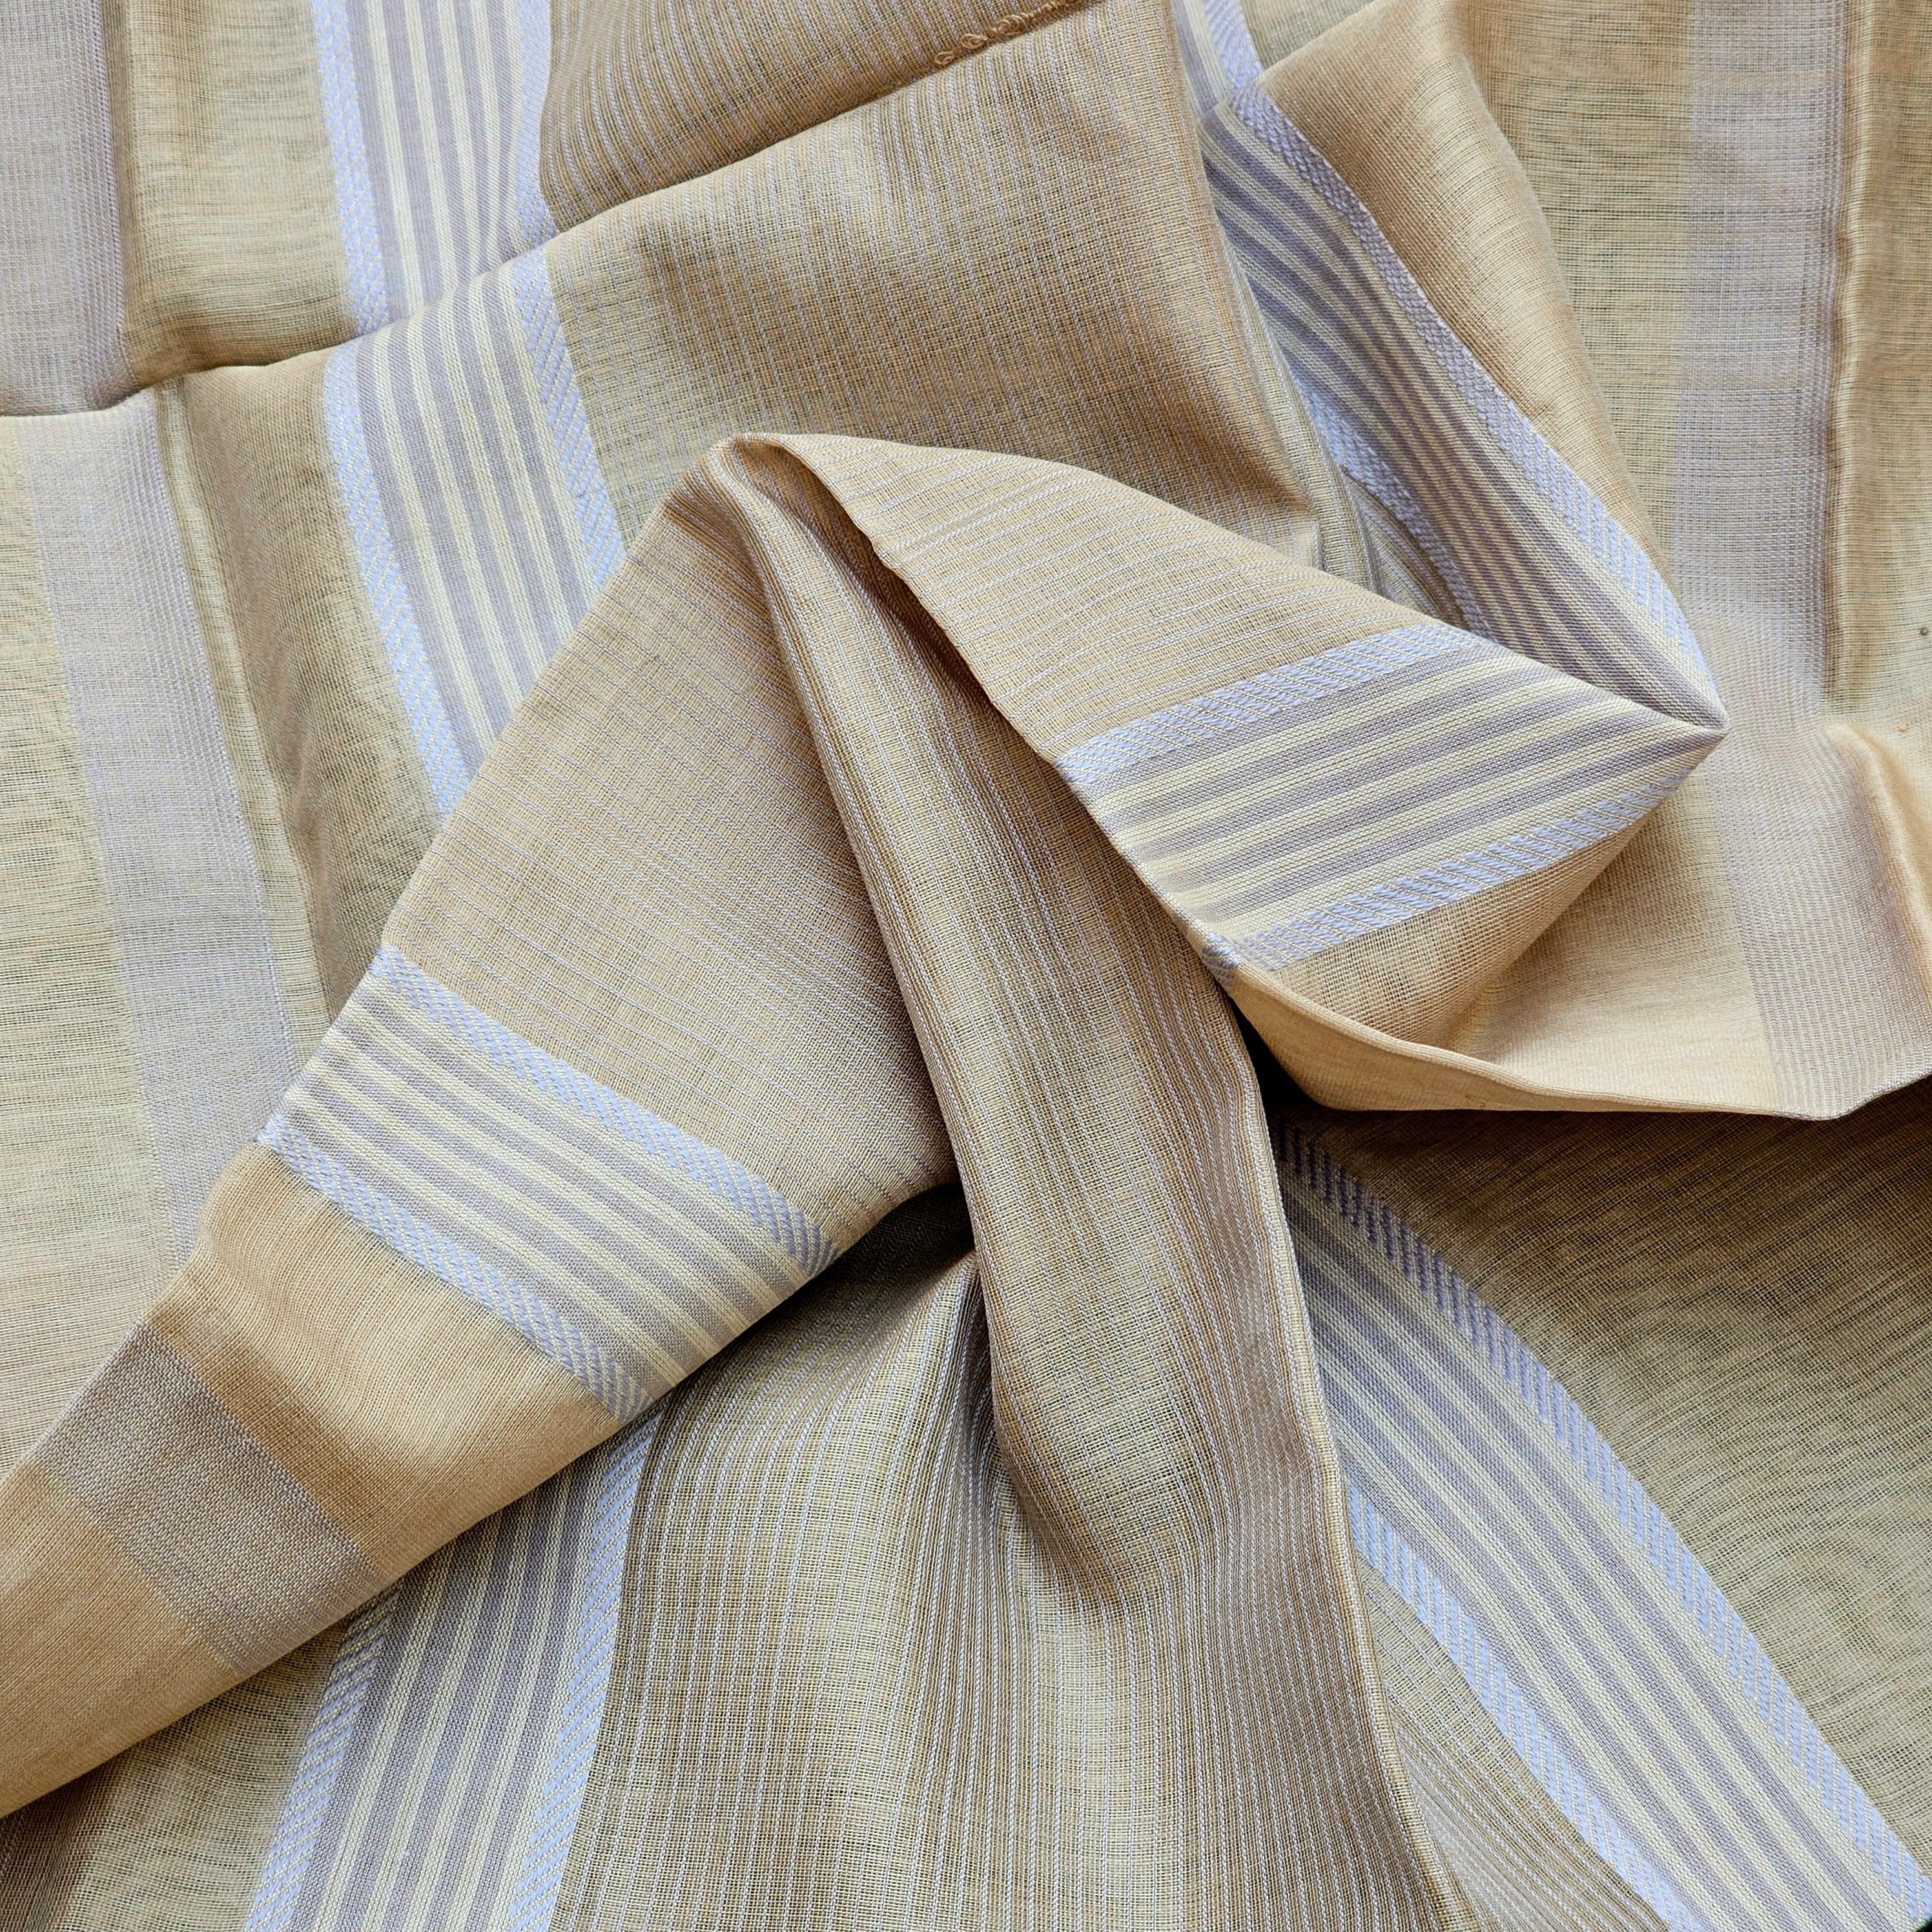 Stole with Stripes and woven Borders.